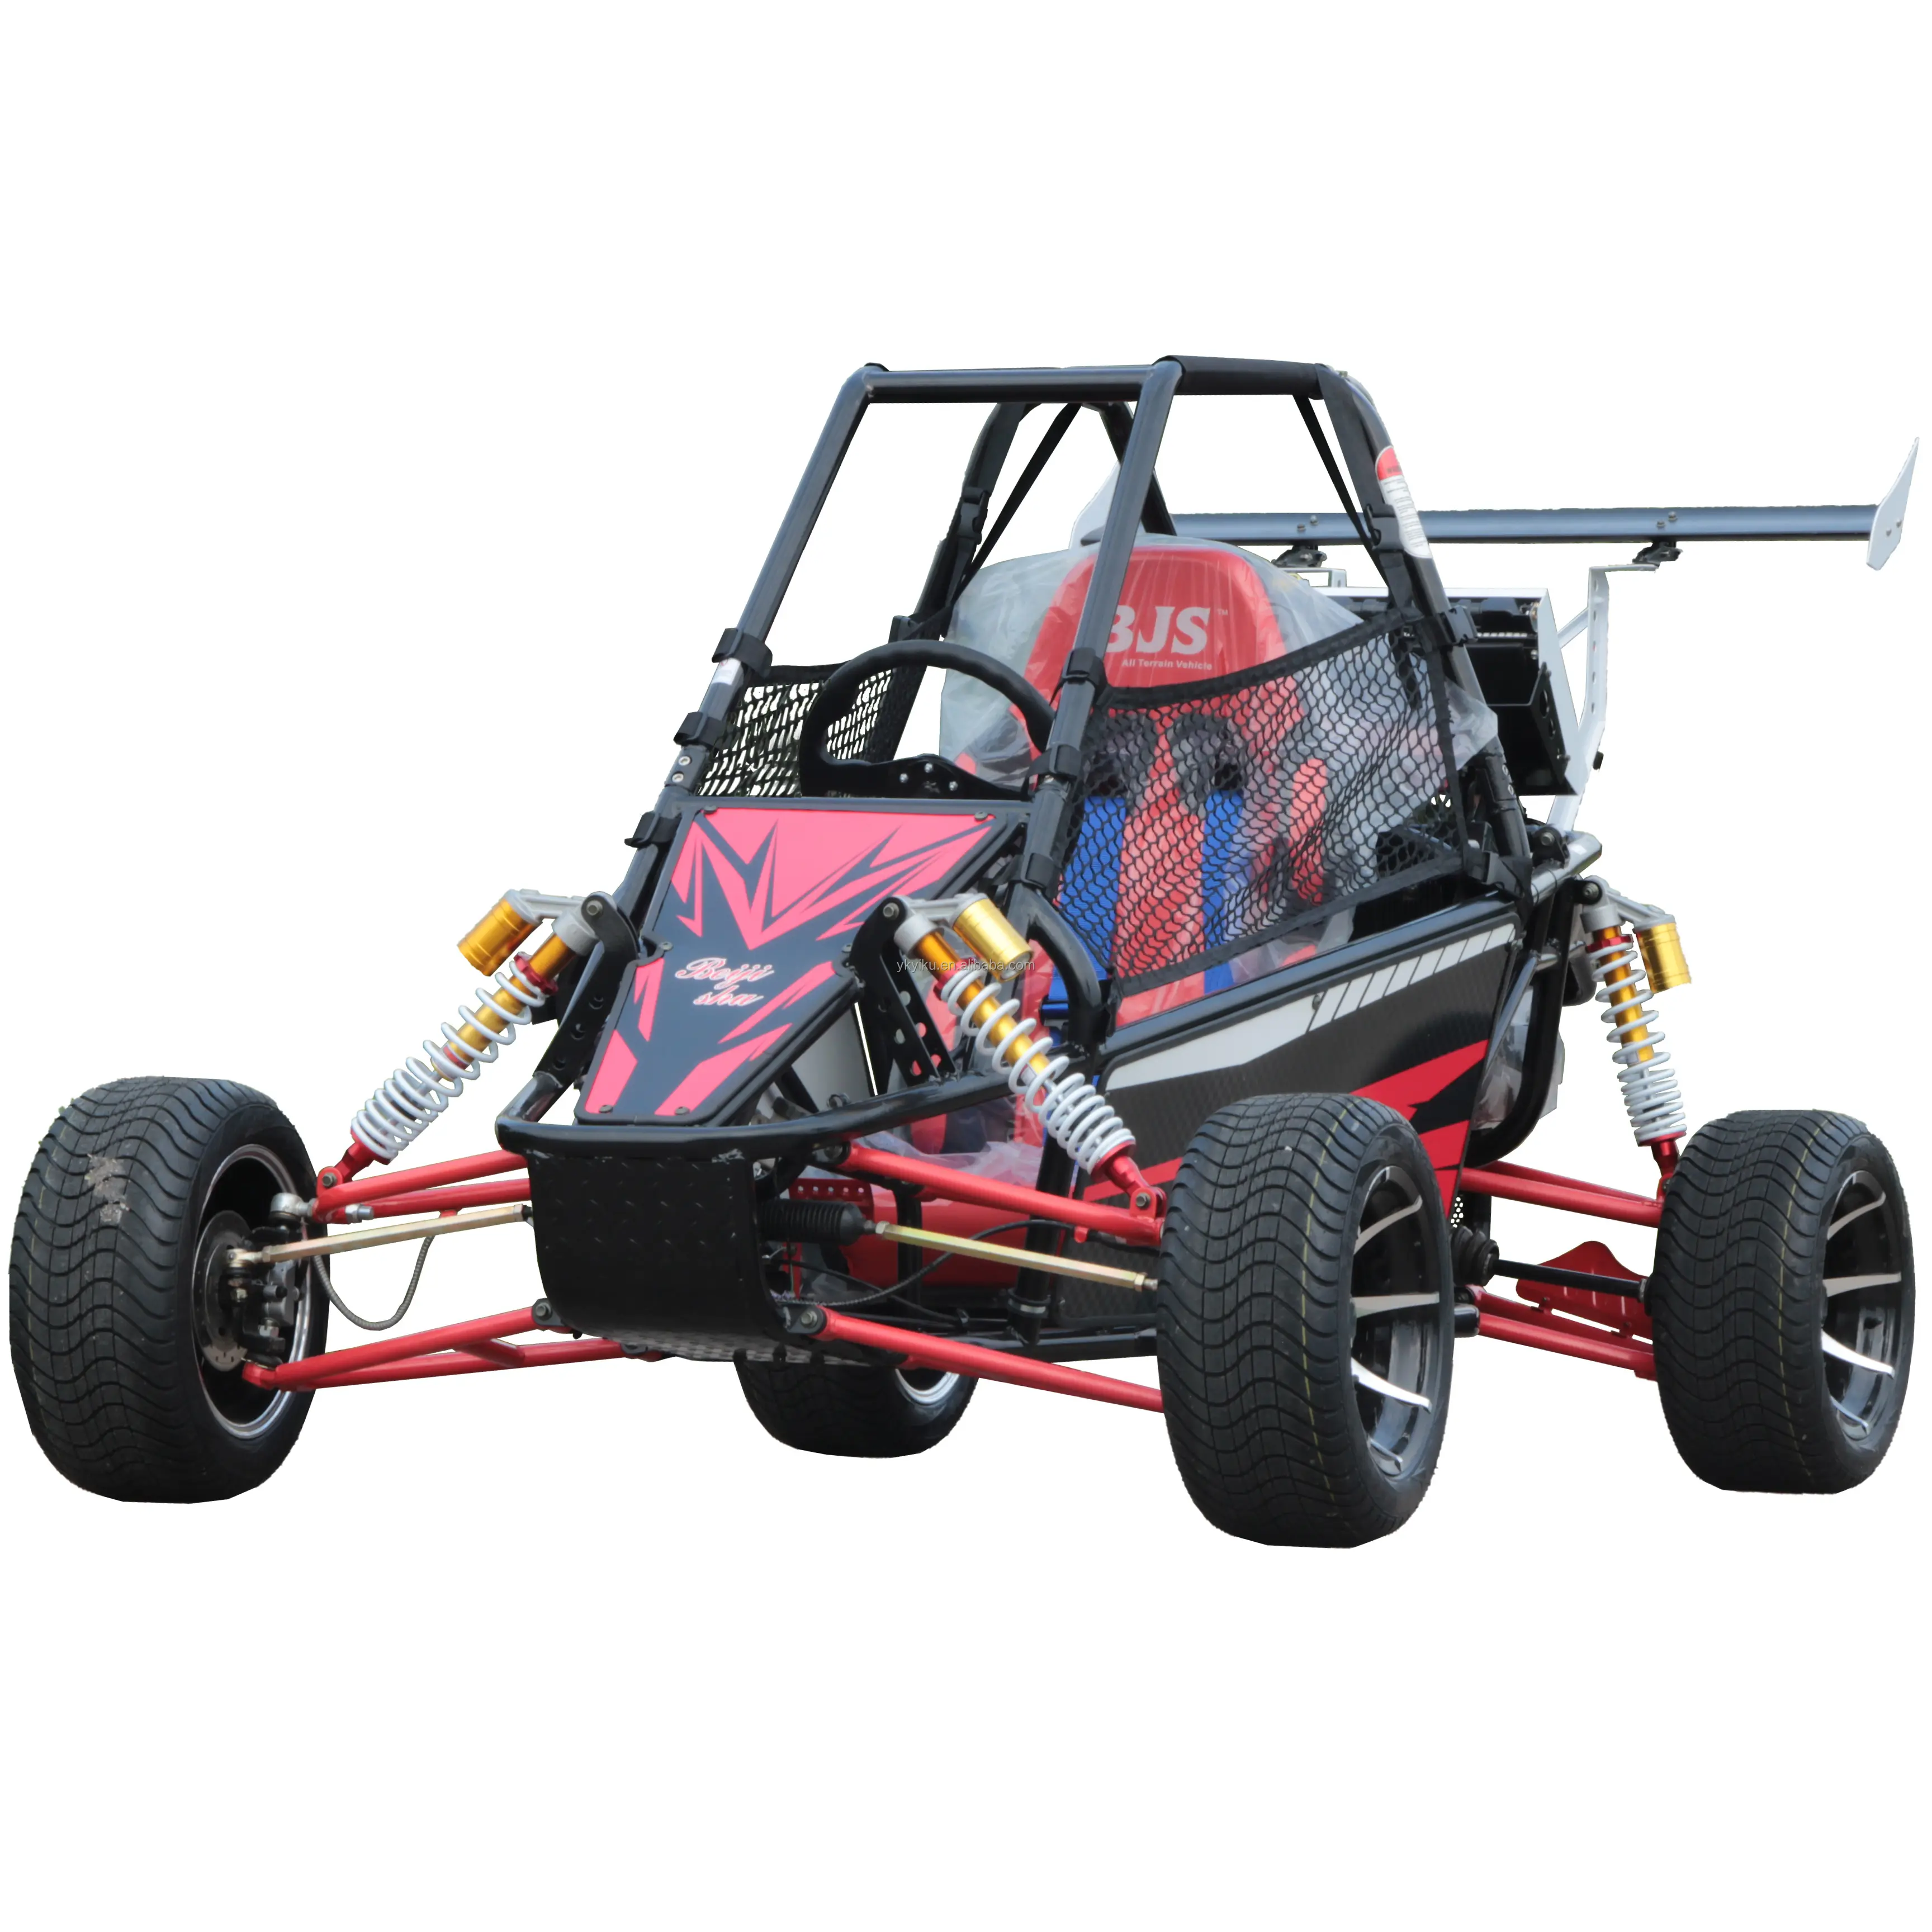 350CC go kart for adults with electric start buggy atv 350cc